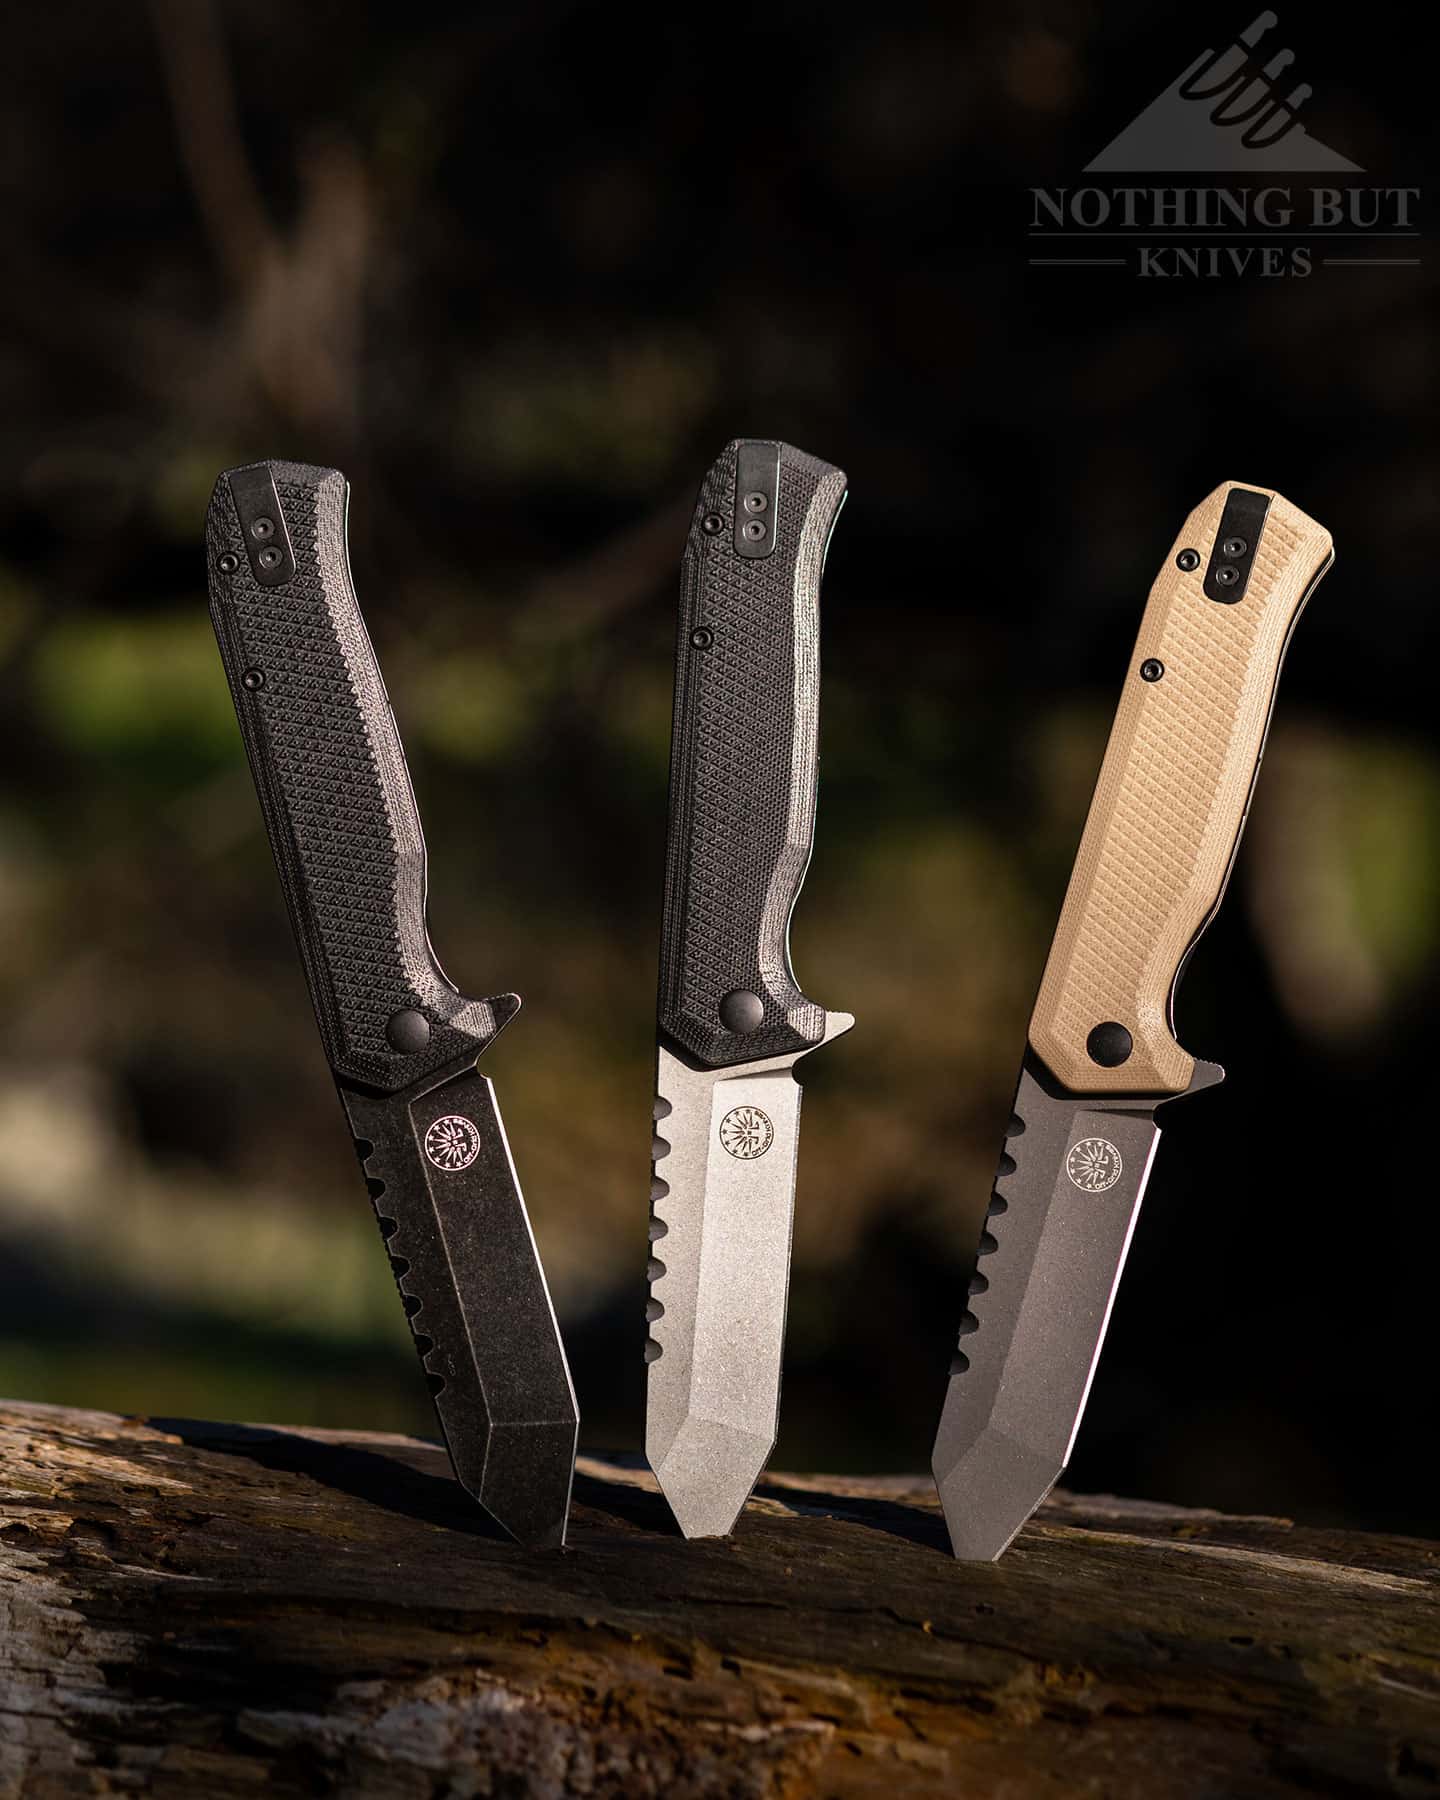 There are three different versions of the Off-Grid Viper V2.